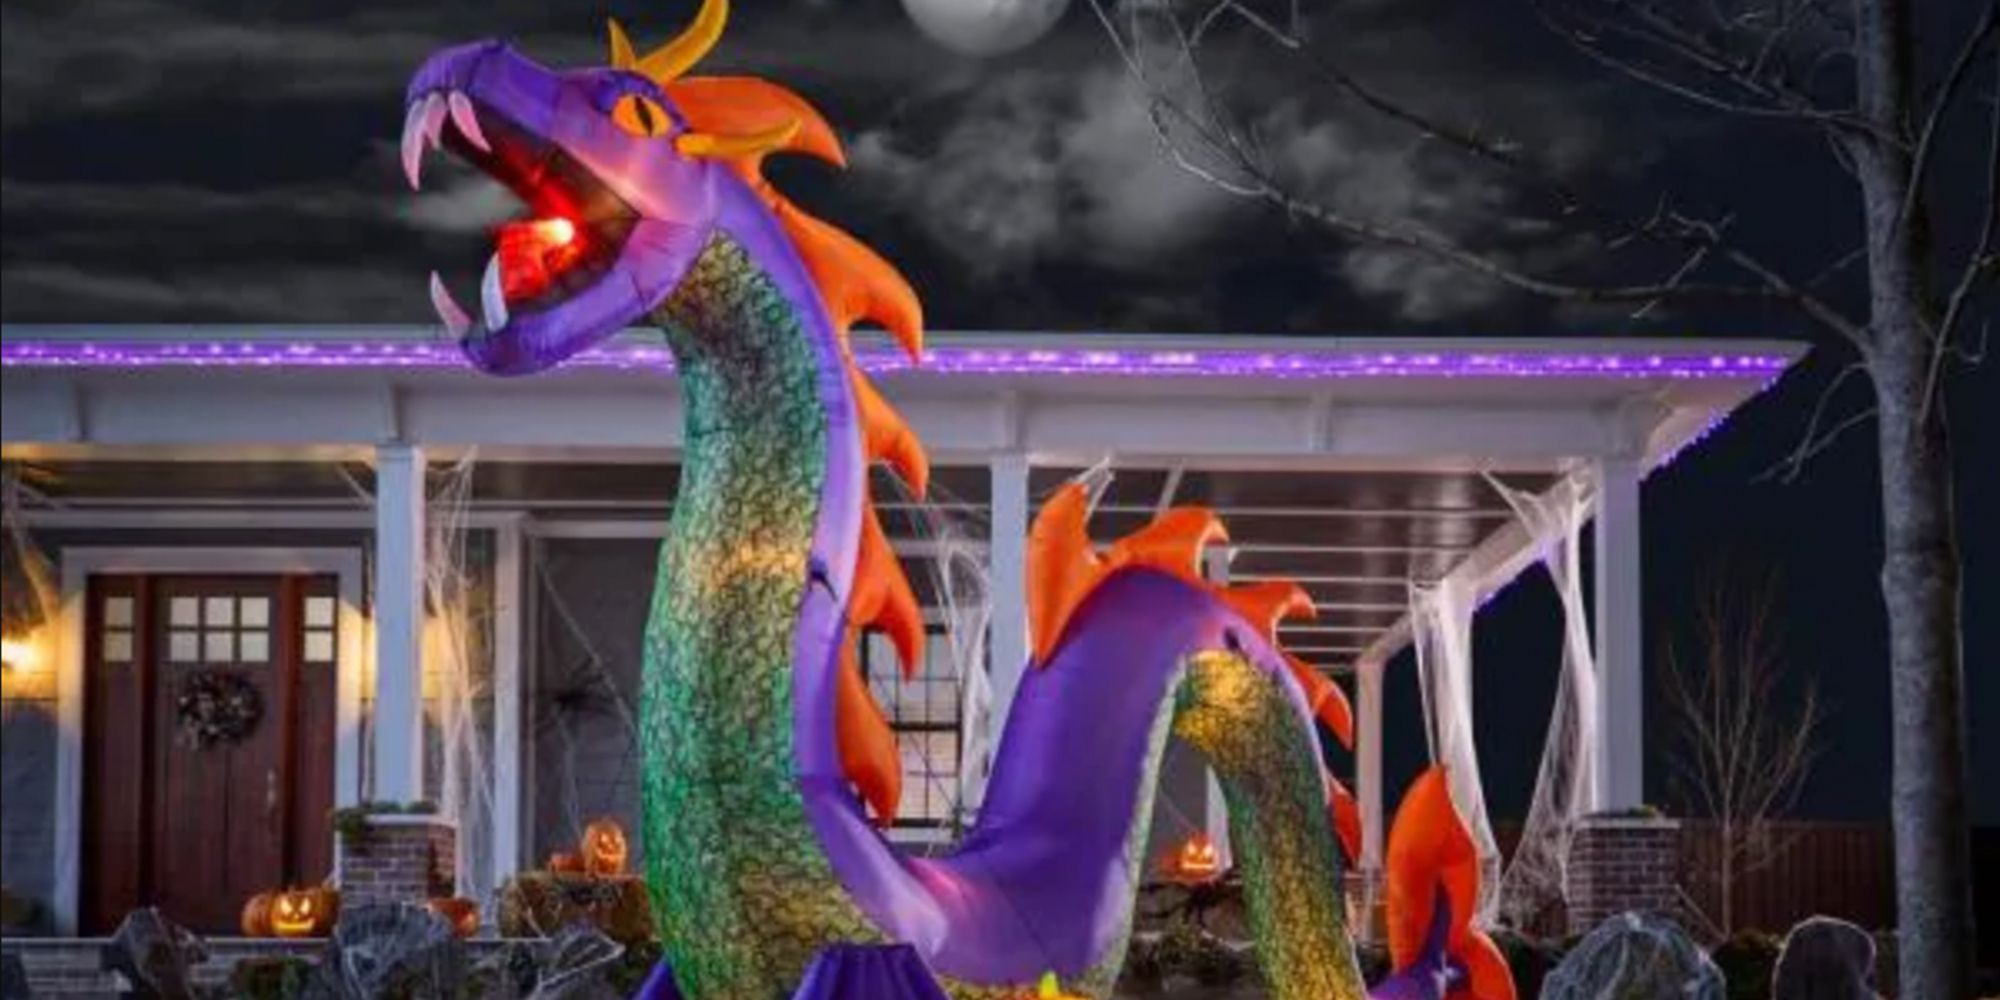 This Terrifying Serpent Is 18 Feet Long, So Trick-or-Treaters Will ...